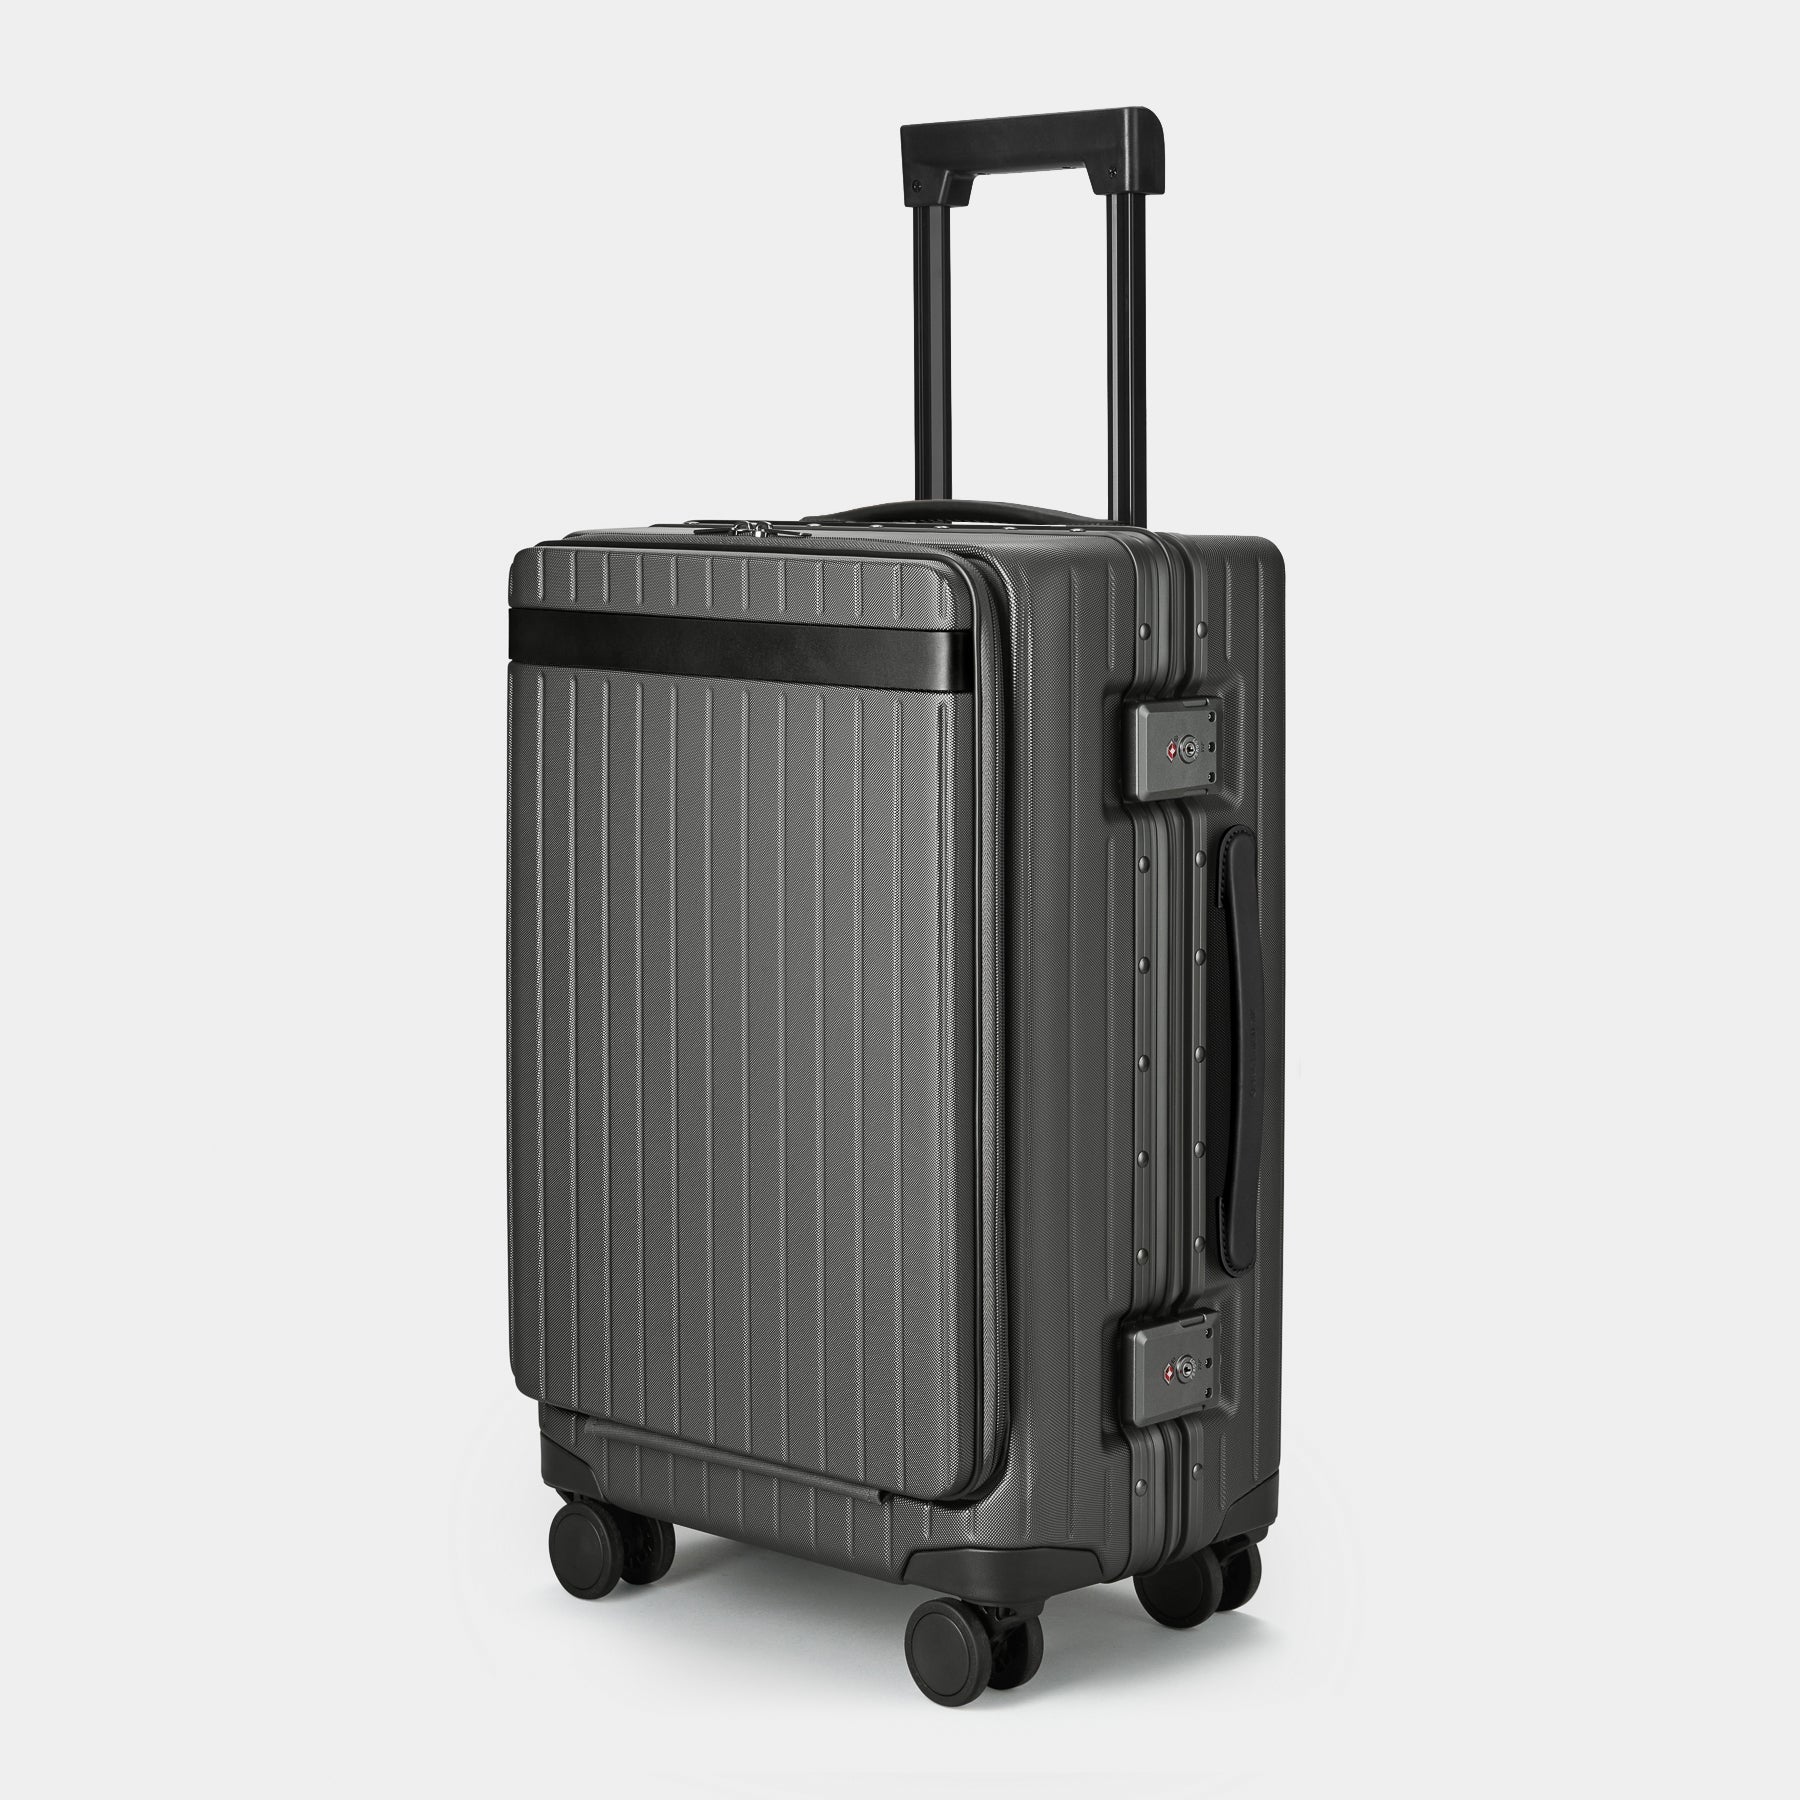 The Carry-on X - Return Black Polycarbonate carry-on suitcase - Excellent Condition